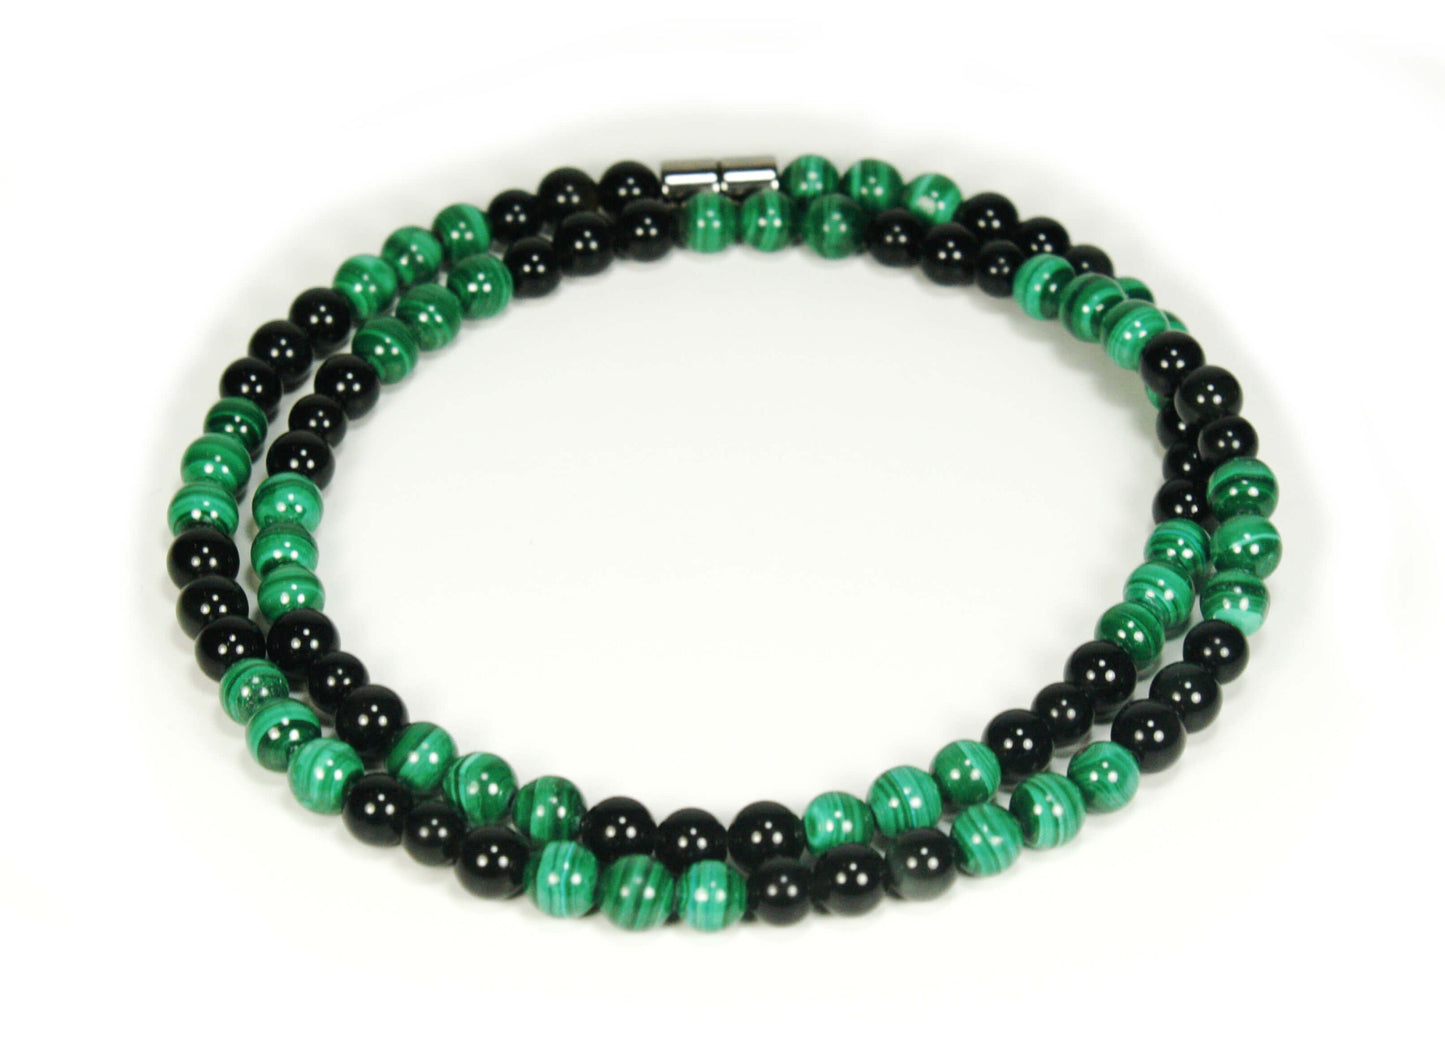 Black Obsidian & Malachite Necklace Natural Gemstone Jewelry Beaded Necklace for Men/Women Healing Crystal Talisman made in USA